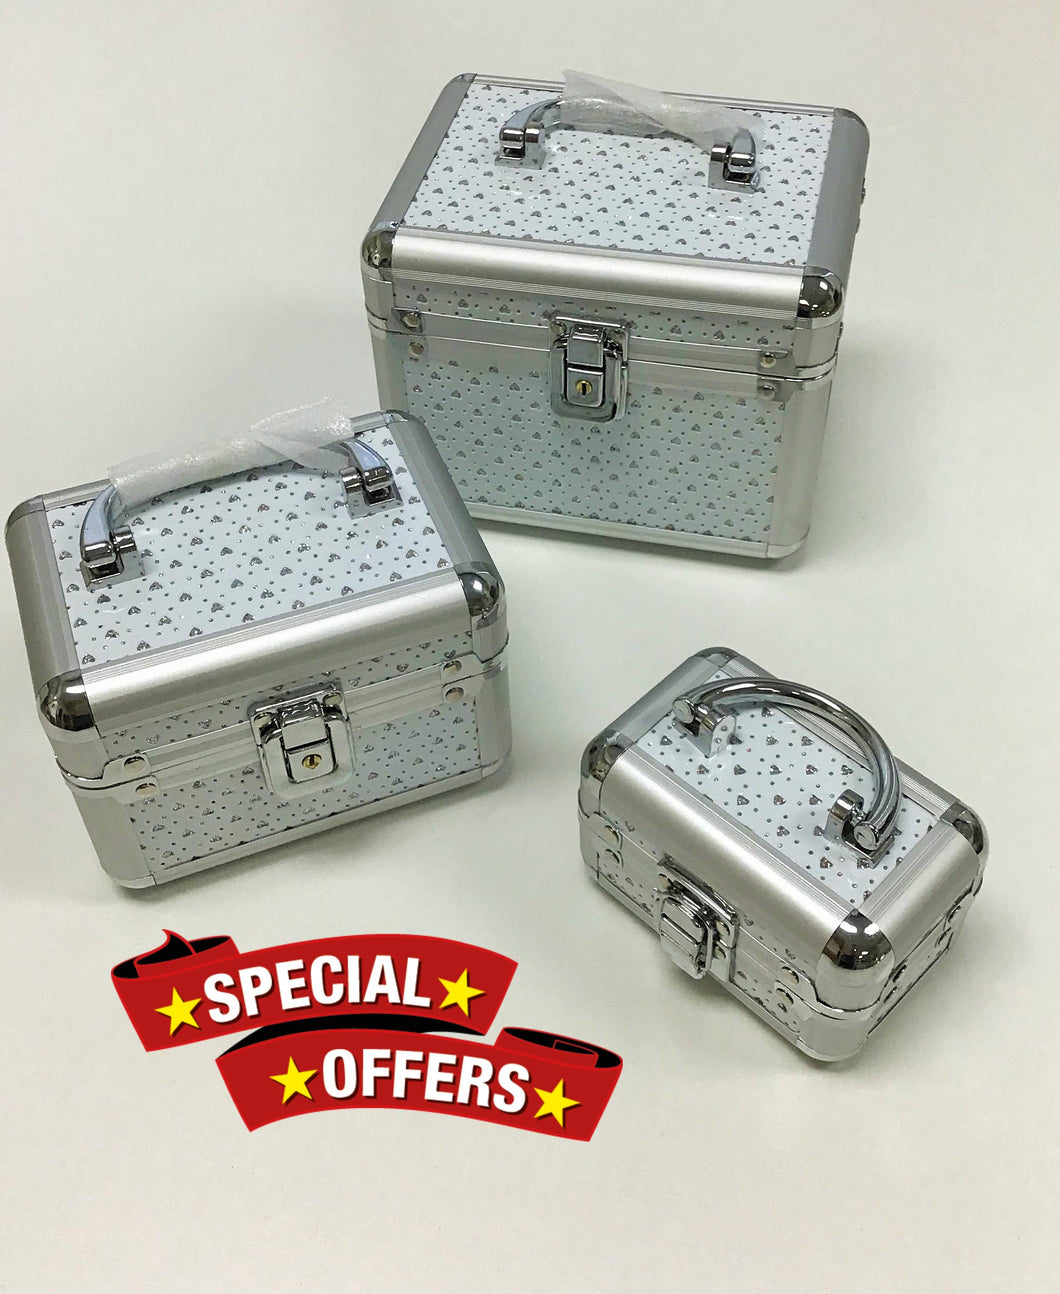 Fashion Beauty Suitcase Box Three Cases Portable In One  Case In Grey Color